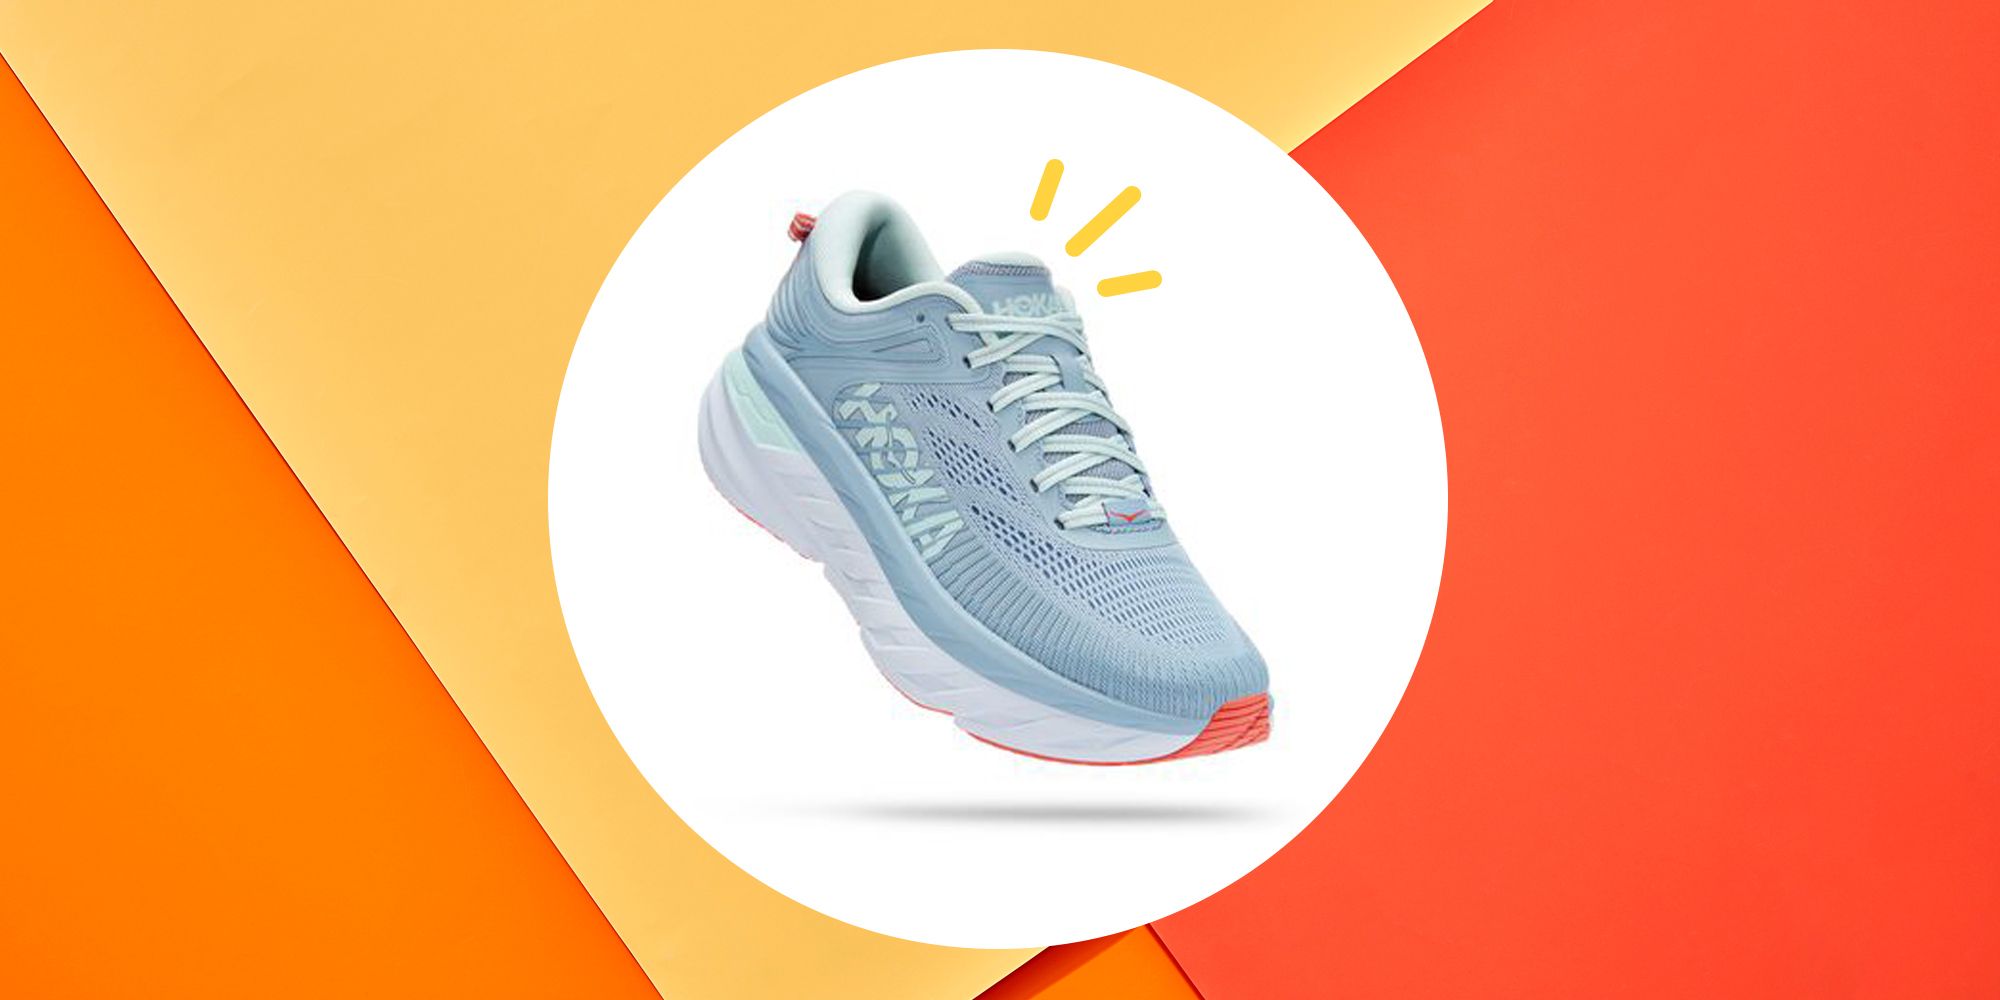 Lululemon Blissfeel running shoe – Tried, tested and reviewed